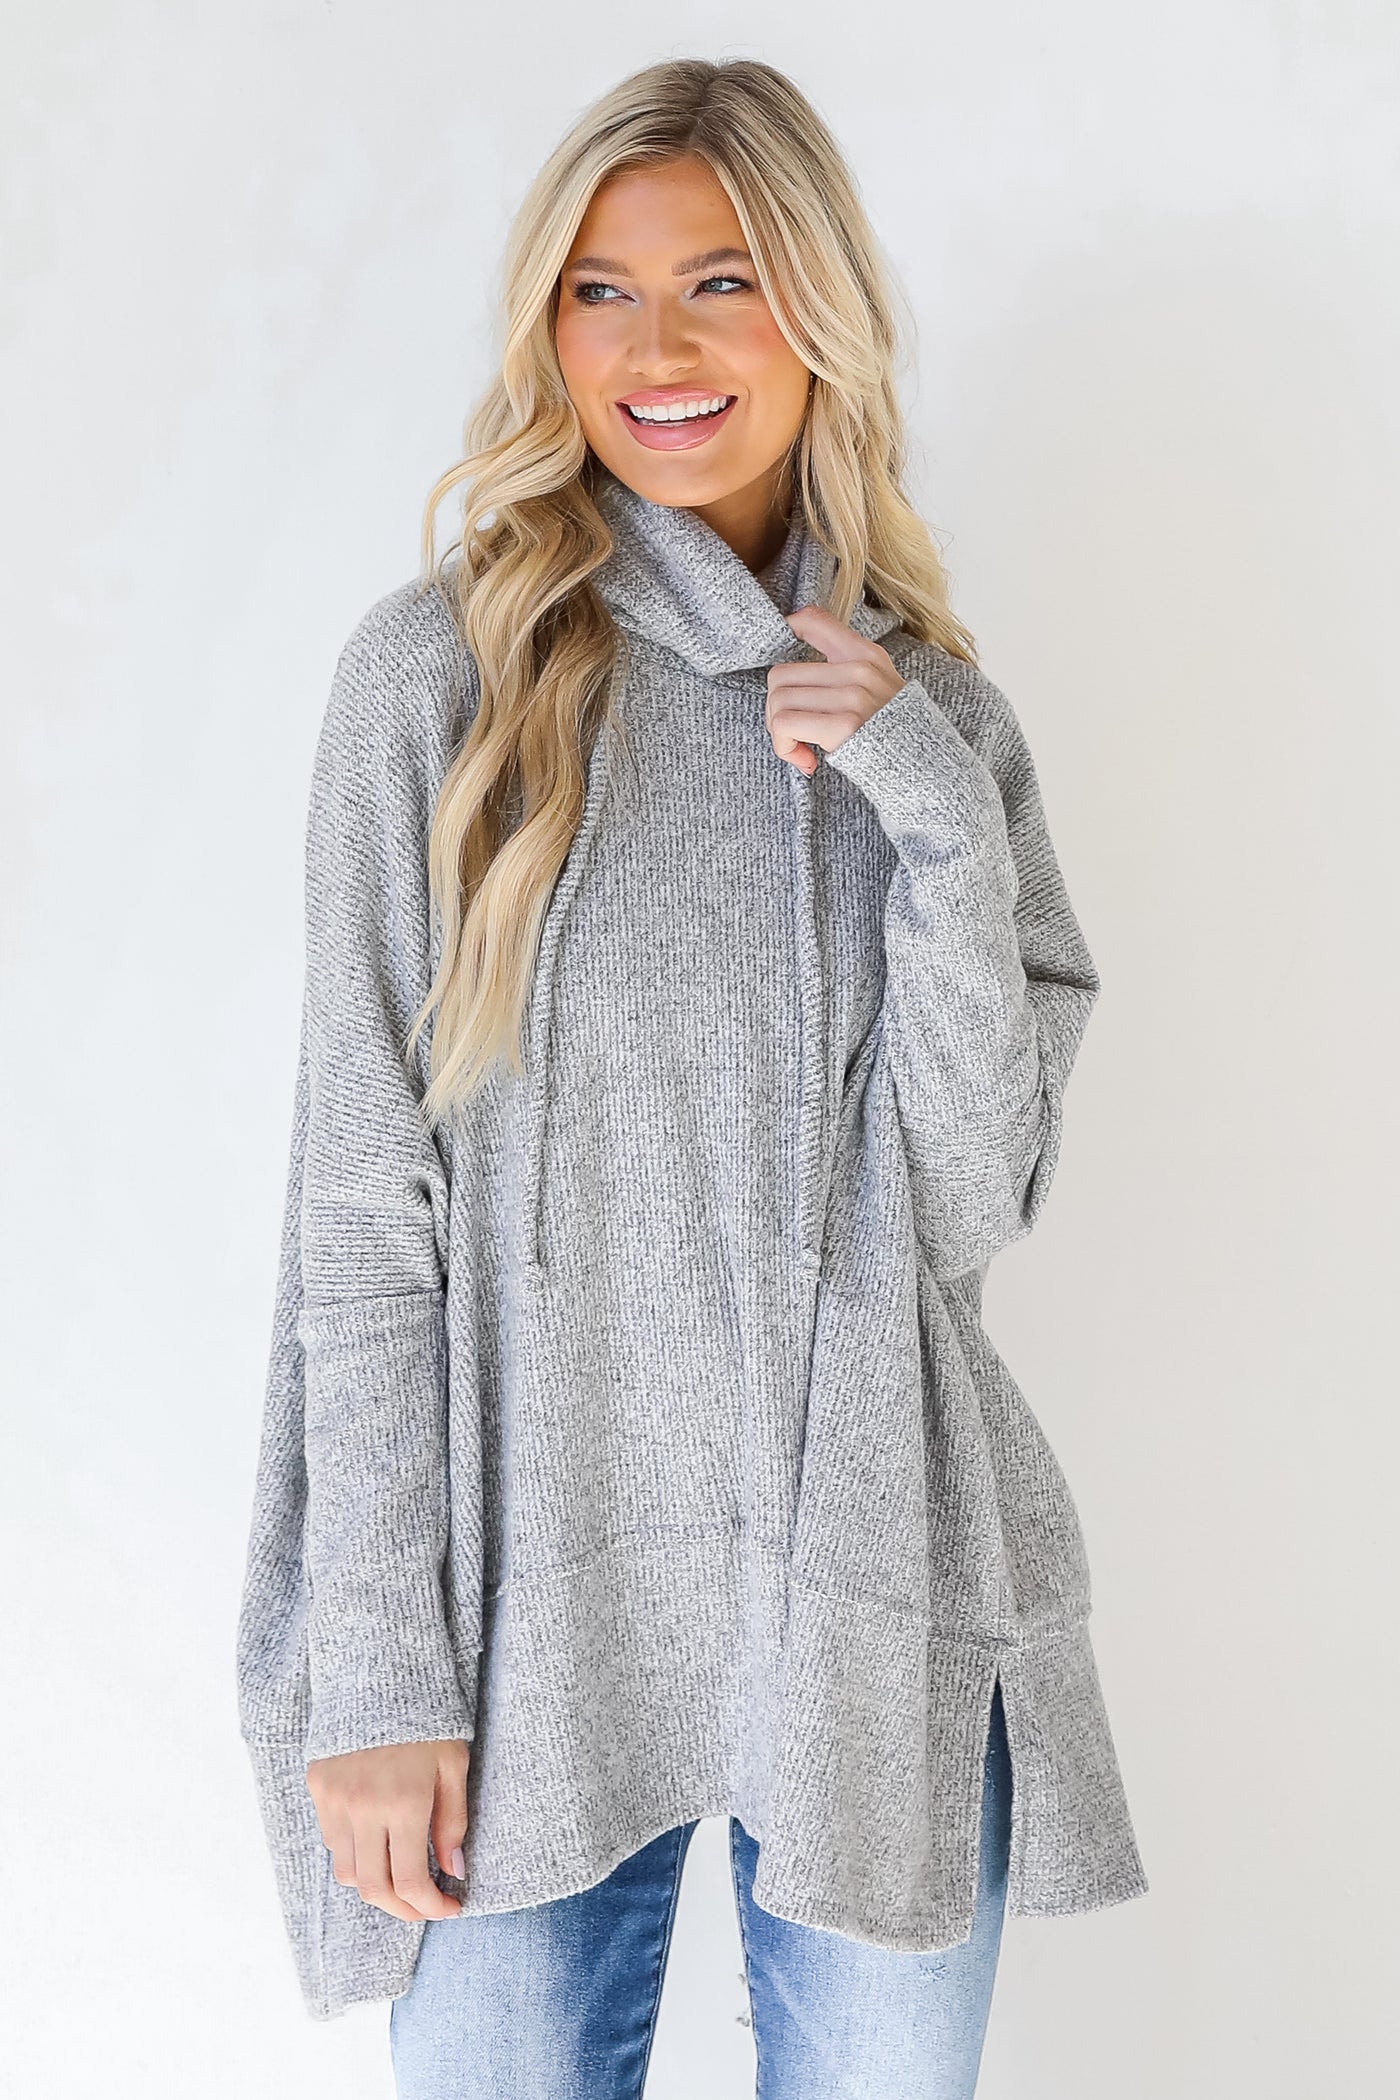 Oversized Cowl Neck Sweater in heather grey on model